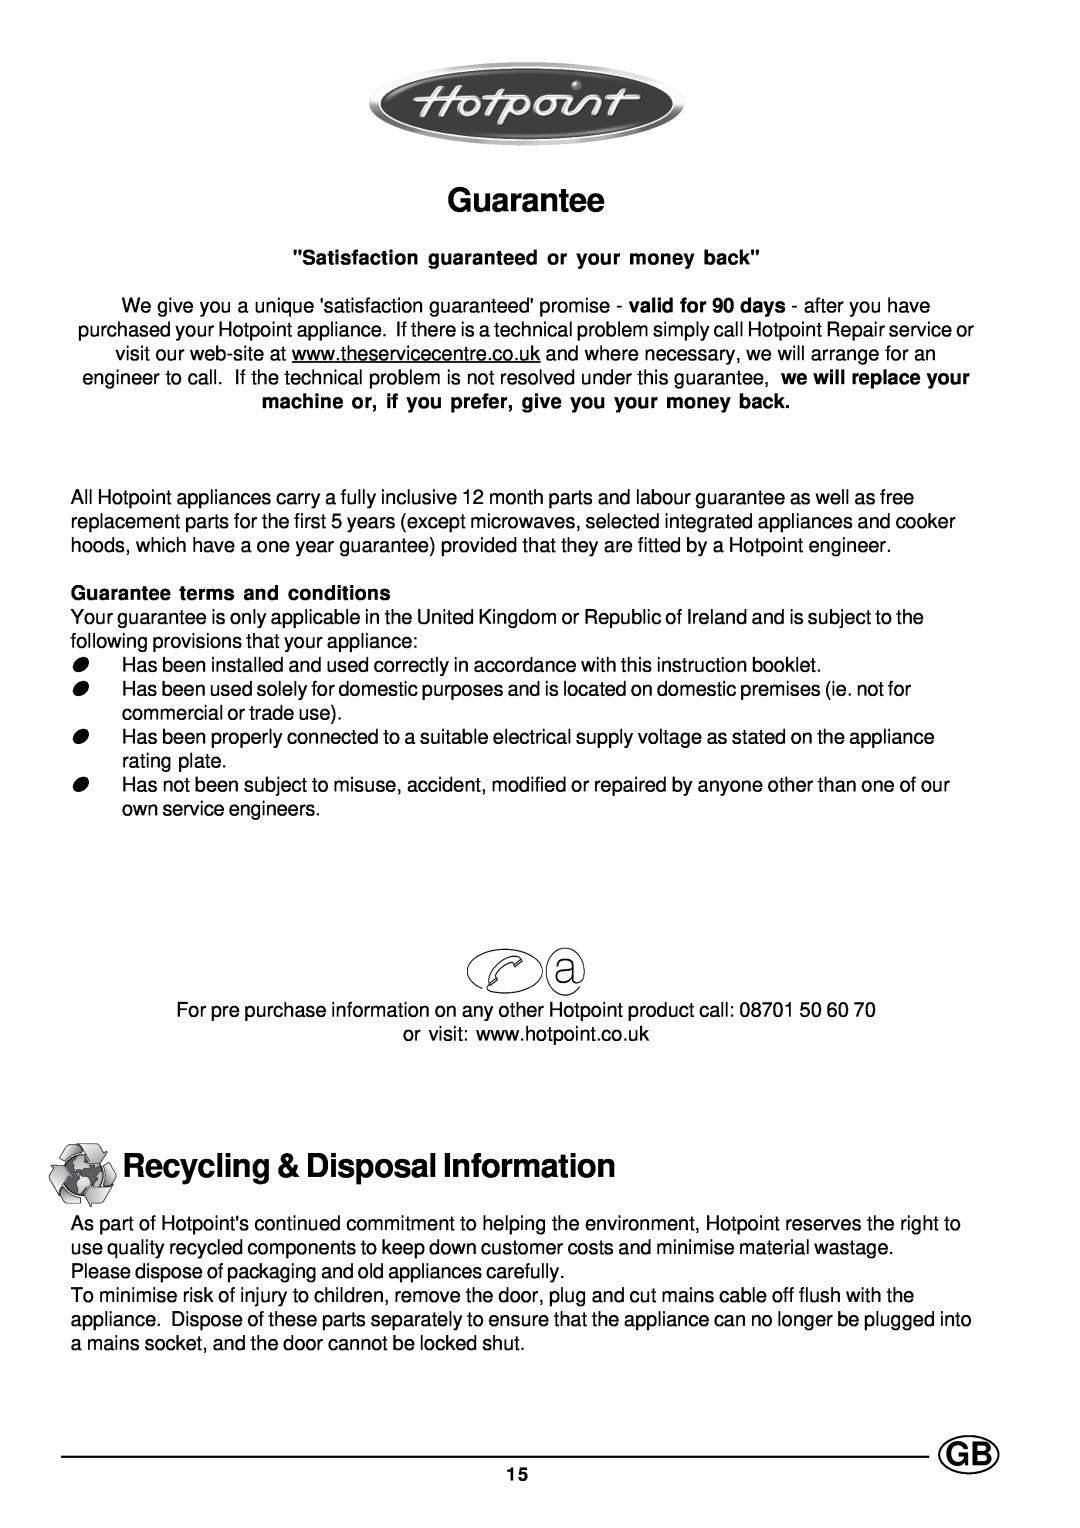 Hotpoint BS53, BS43 manual Guarantee, Recycling & Disposal Information, Satisfaction guaranteed or your money back 